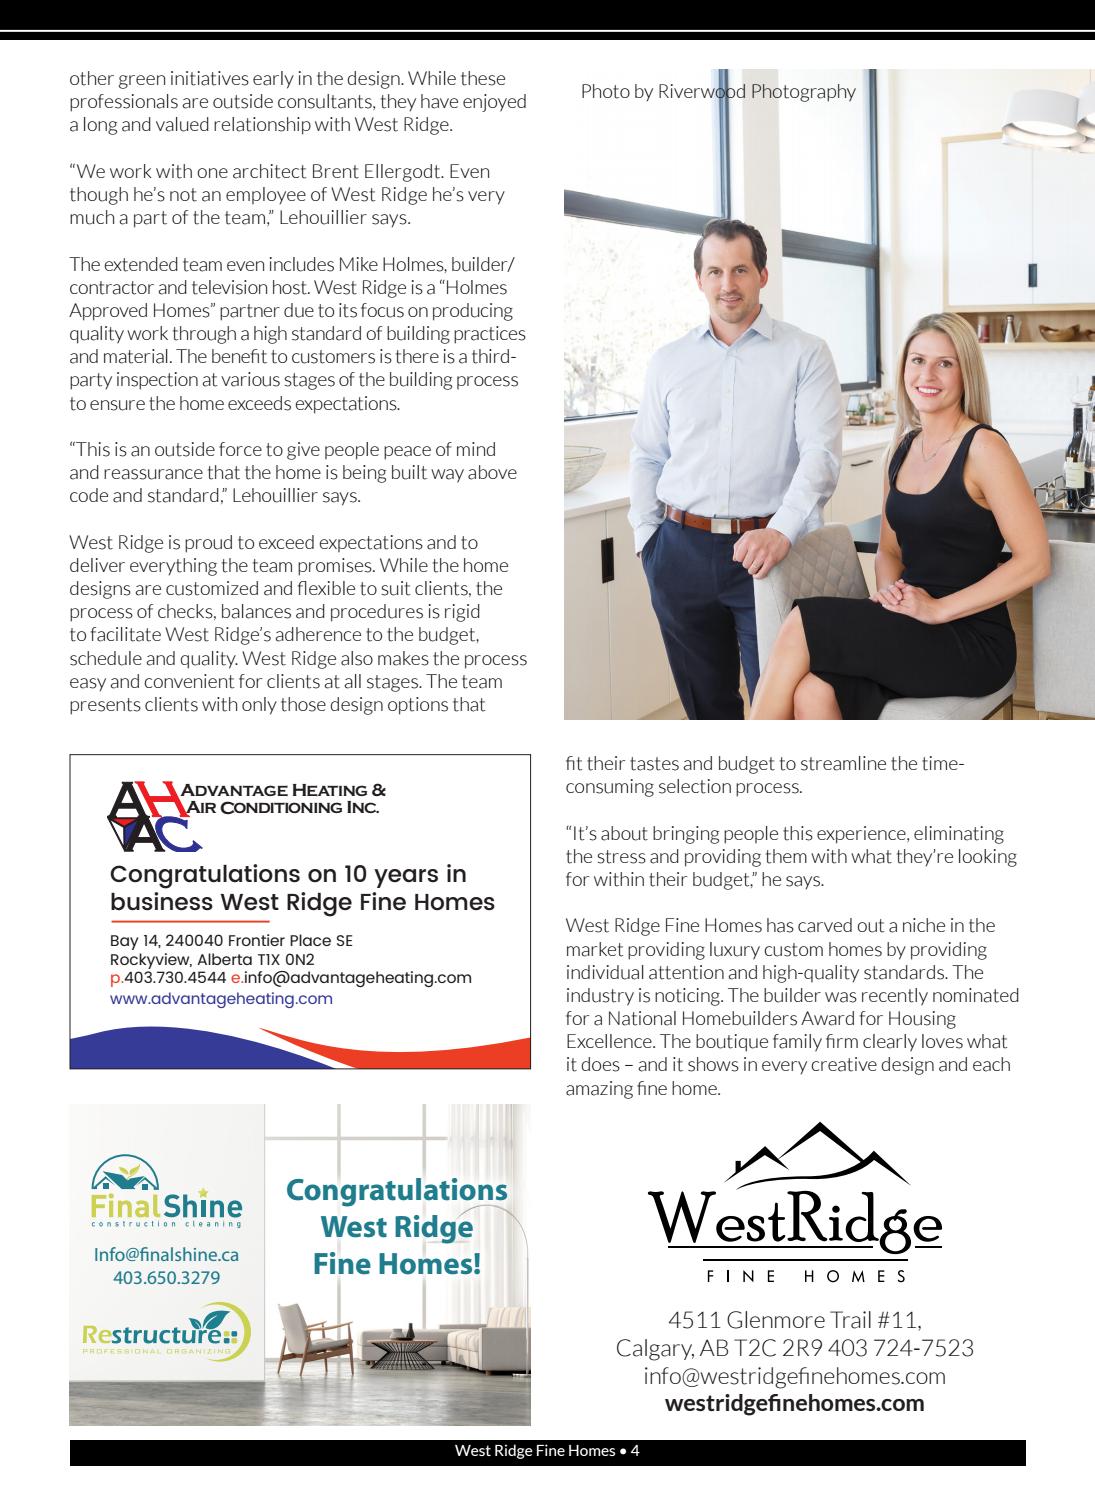 Business in Calgary Magazine - Business Profile for West Ridge Fine Homes